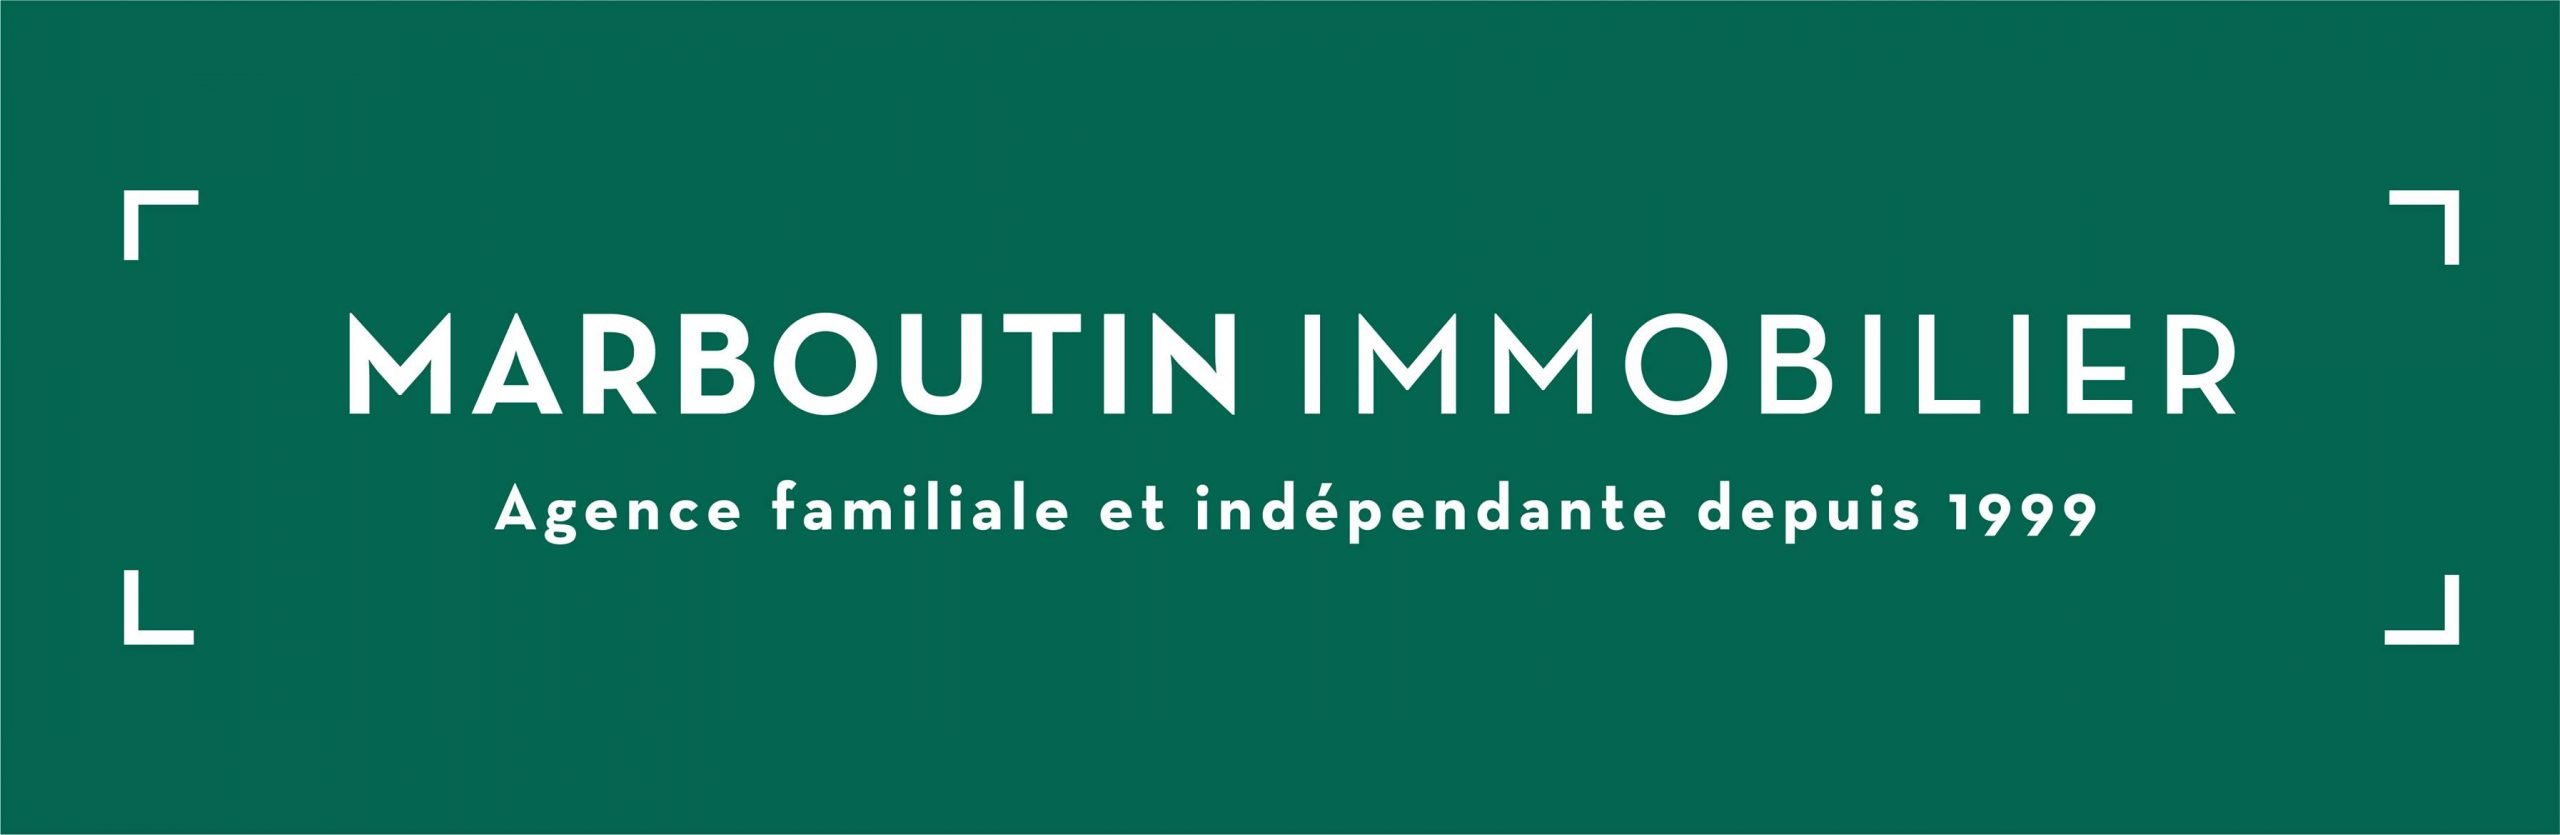 marboutin-immobilier